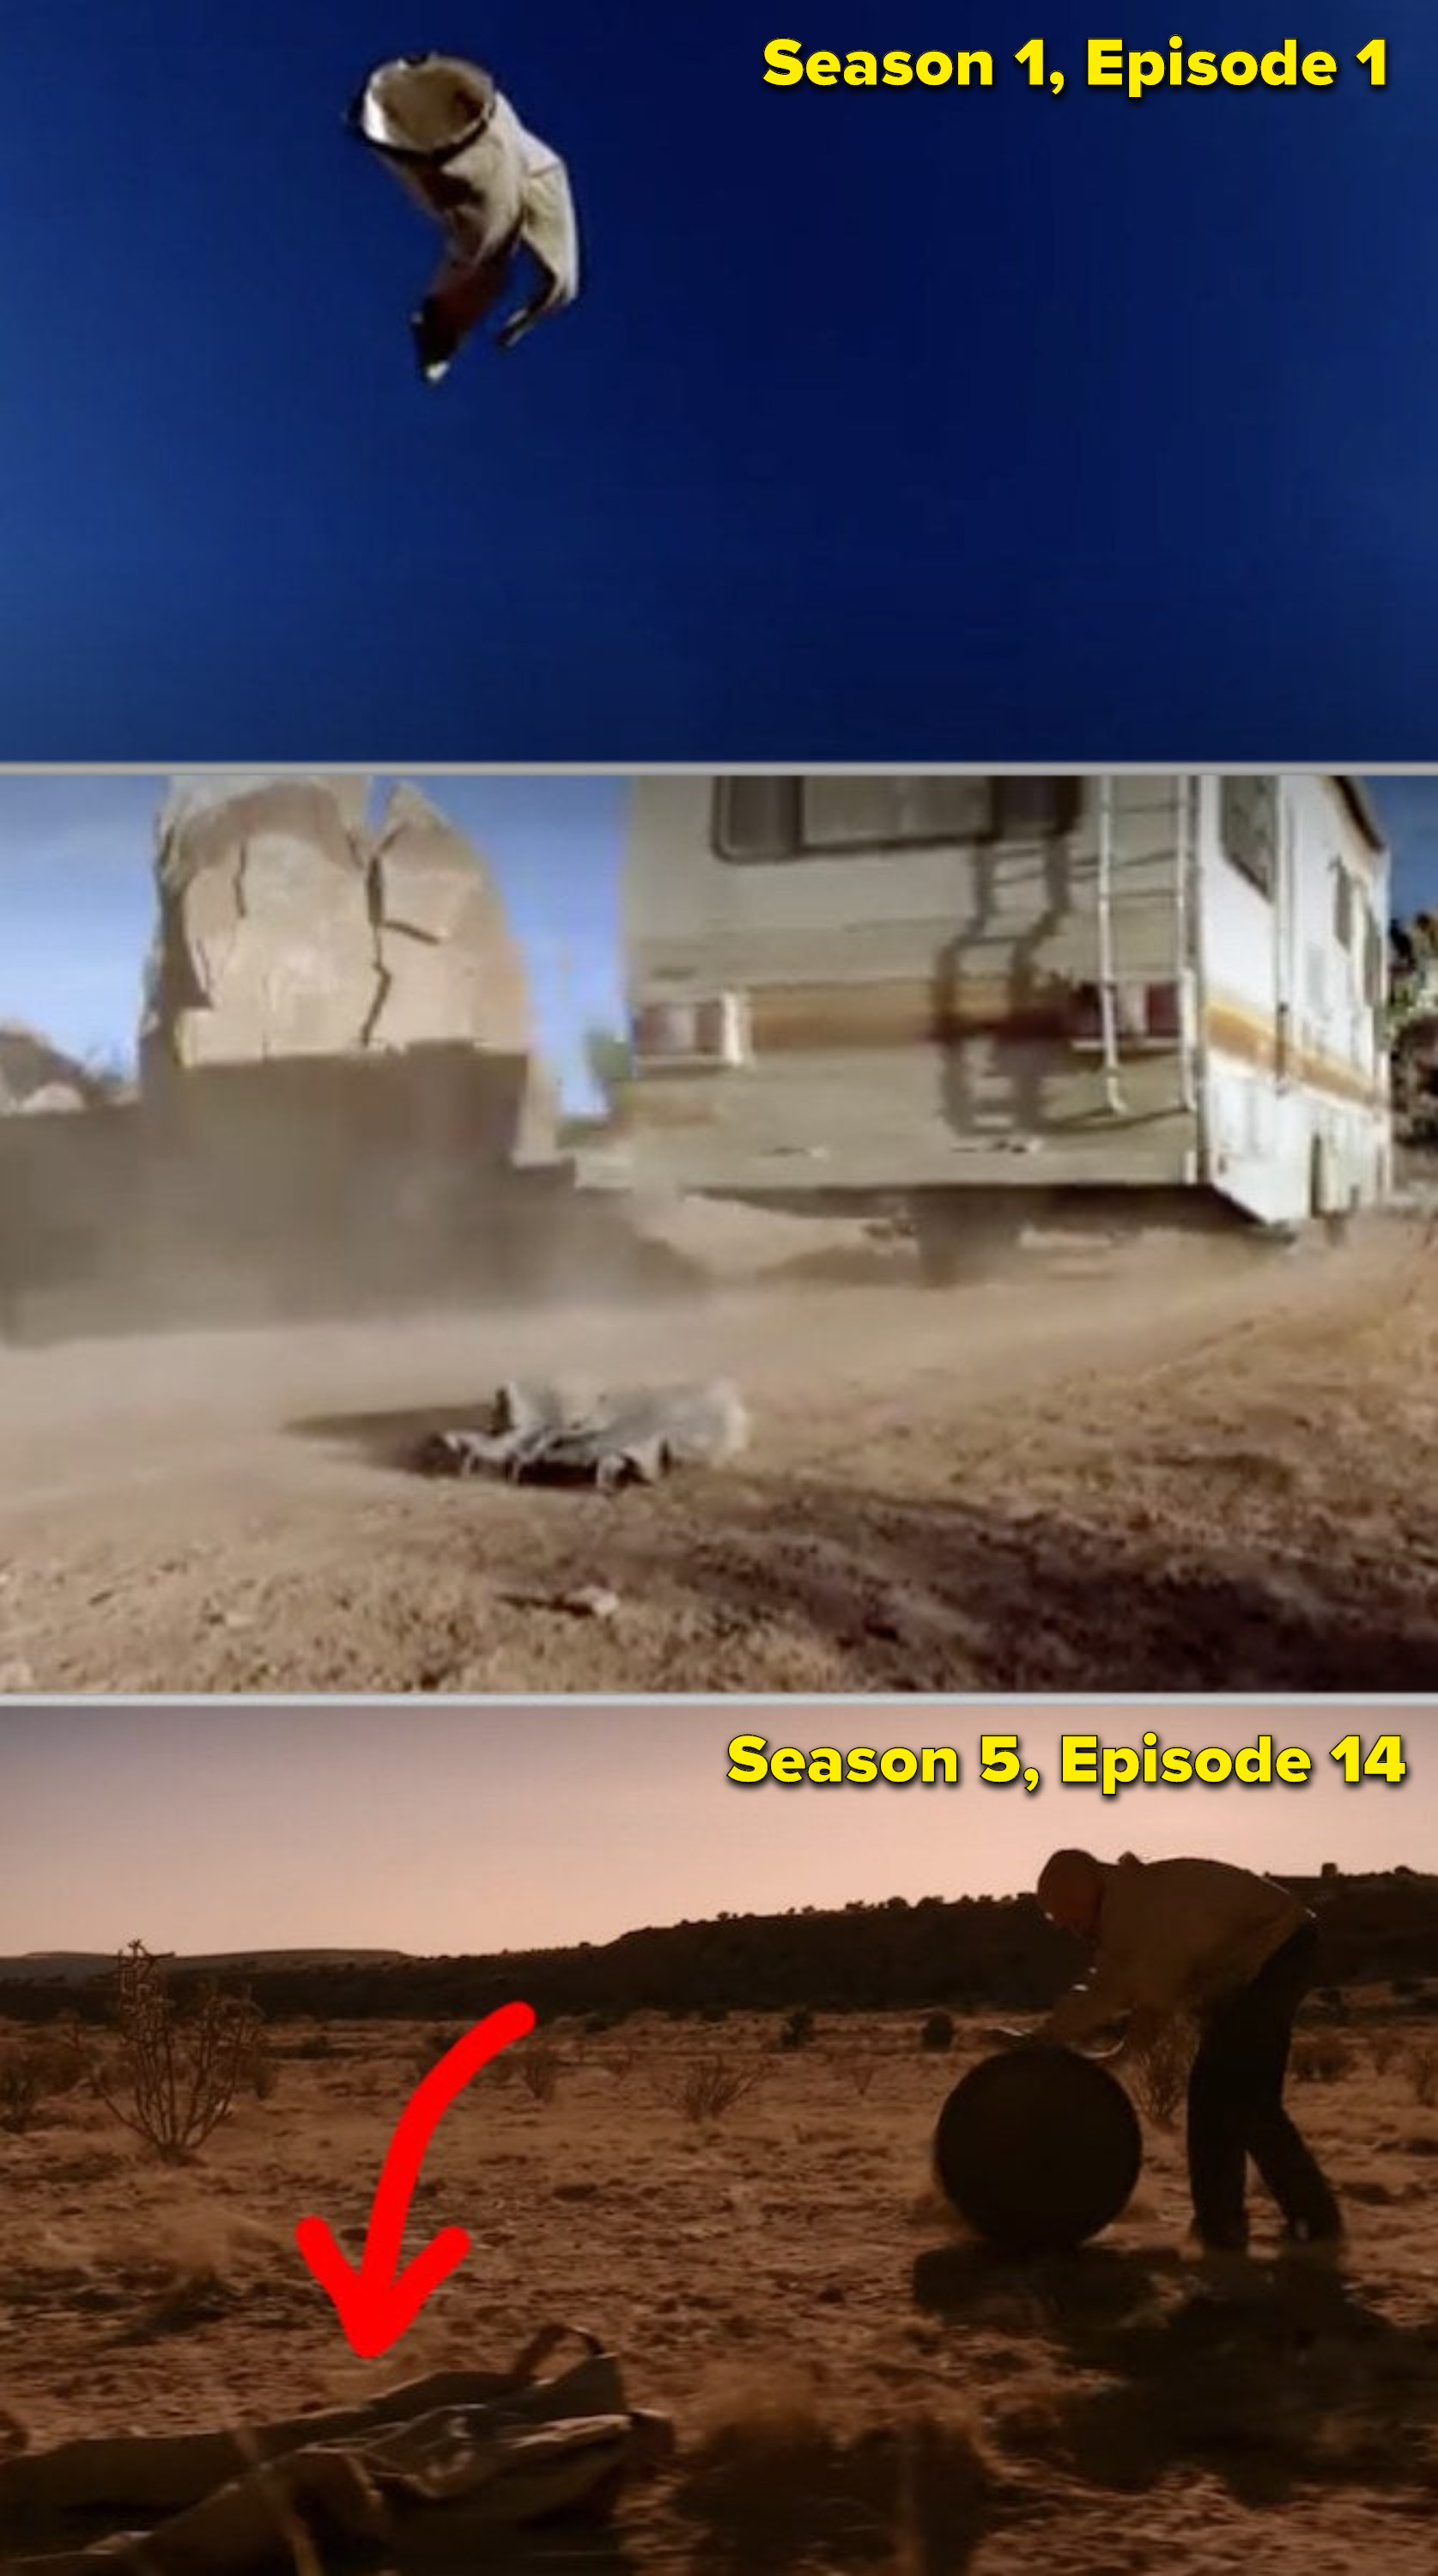 Side-by-sides of Walter White&#x27;s pants flying through the air in the pilot episode, vs. him walking by those same pants in the desert five years later